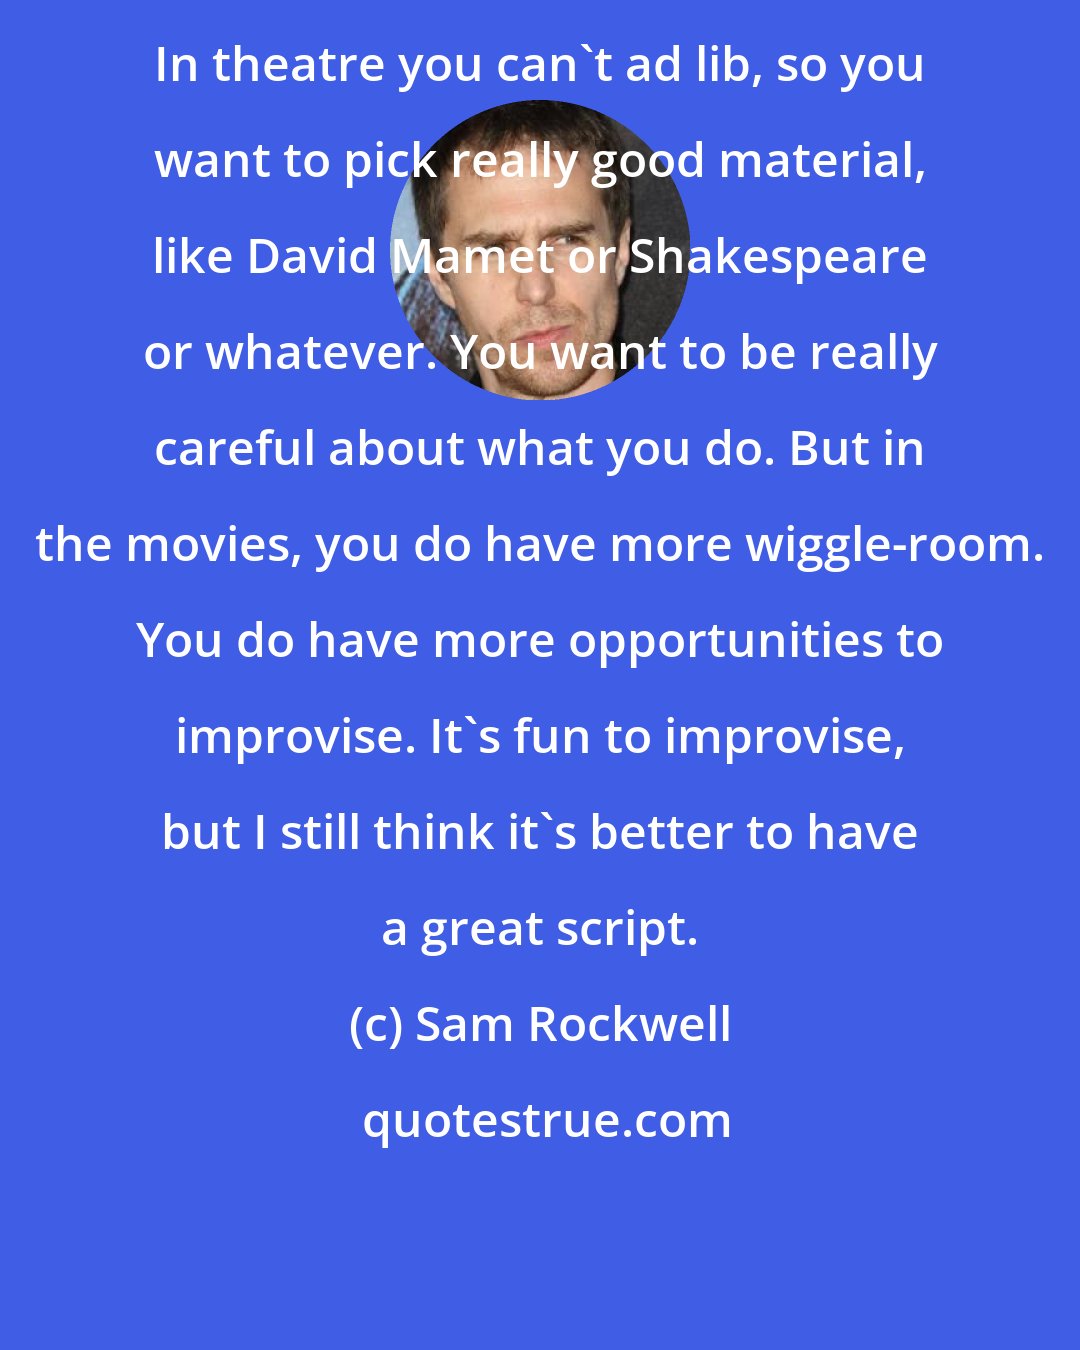 Sam Rockwell: In theatre you can't ad lib, so you want to pick really good material, like David Mamet or Shakespeare or whatever. You want to be really careful about what you do. But in the movies, you do have more wiggle-room. You do have more opportunities to improvise. It's fun to improvise, but I still think it's better to have a great script.